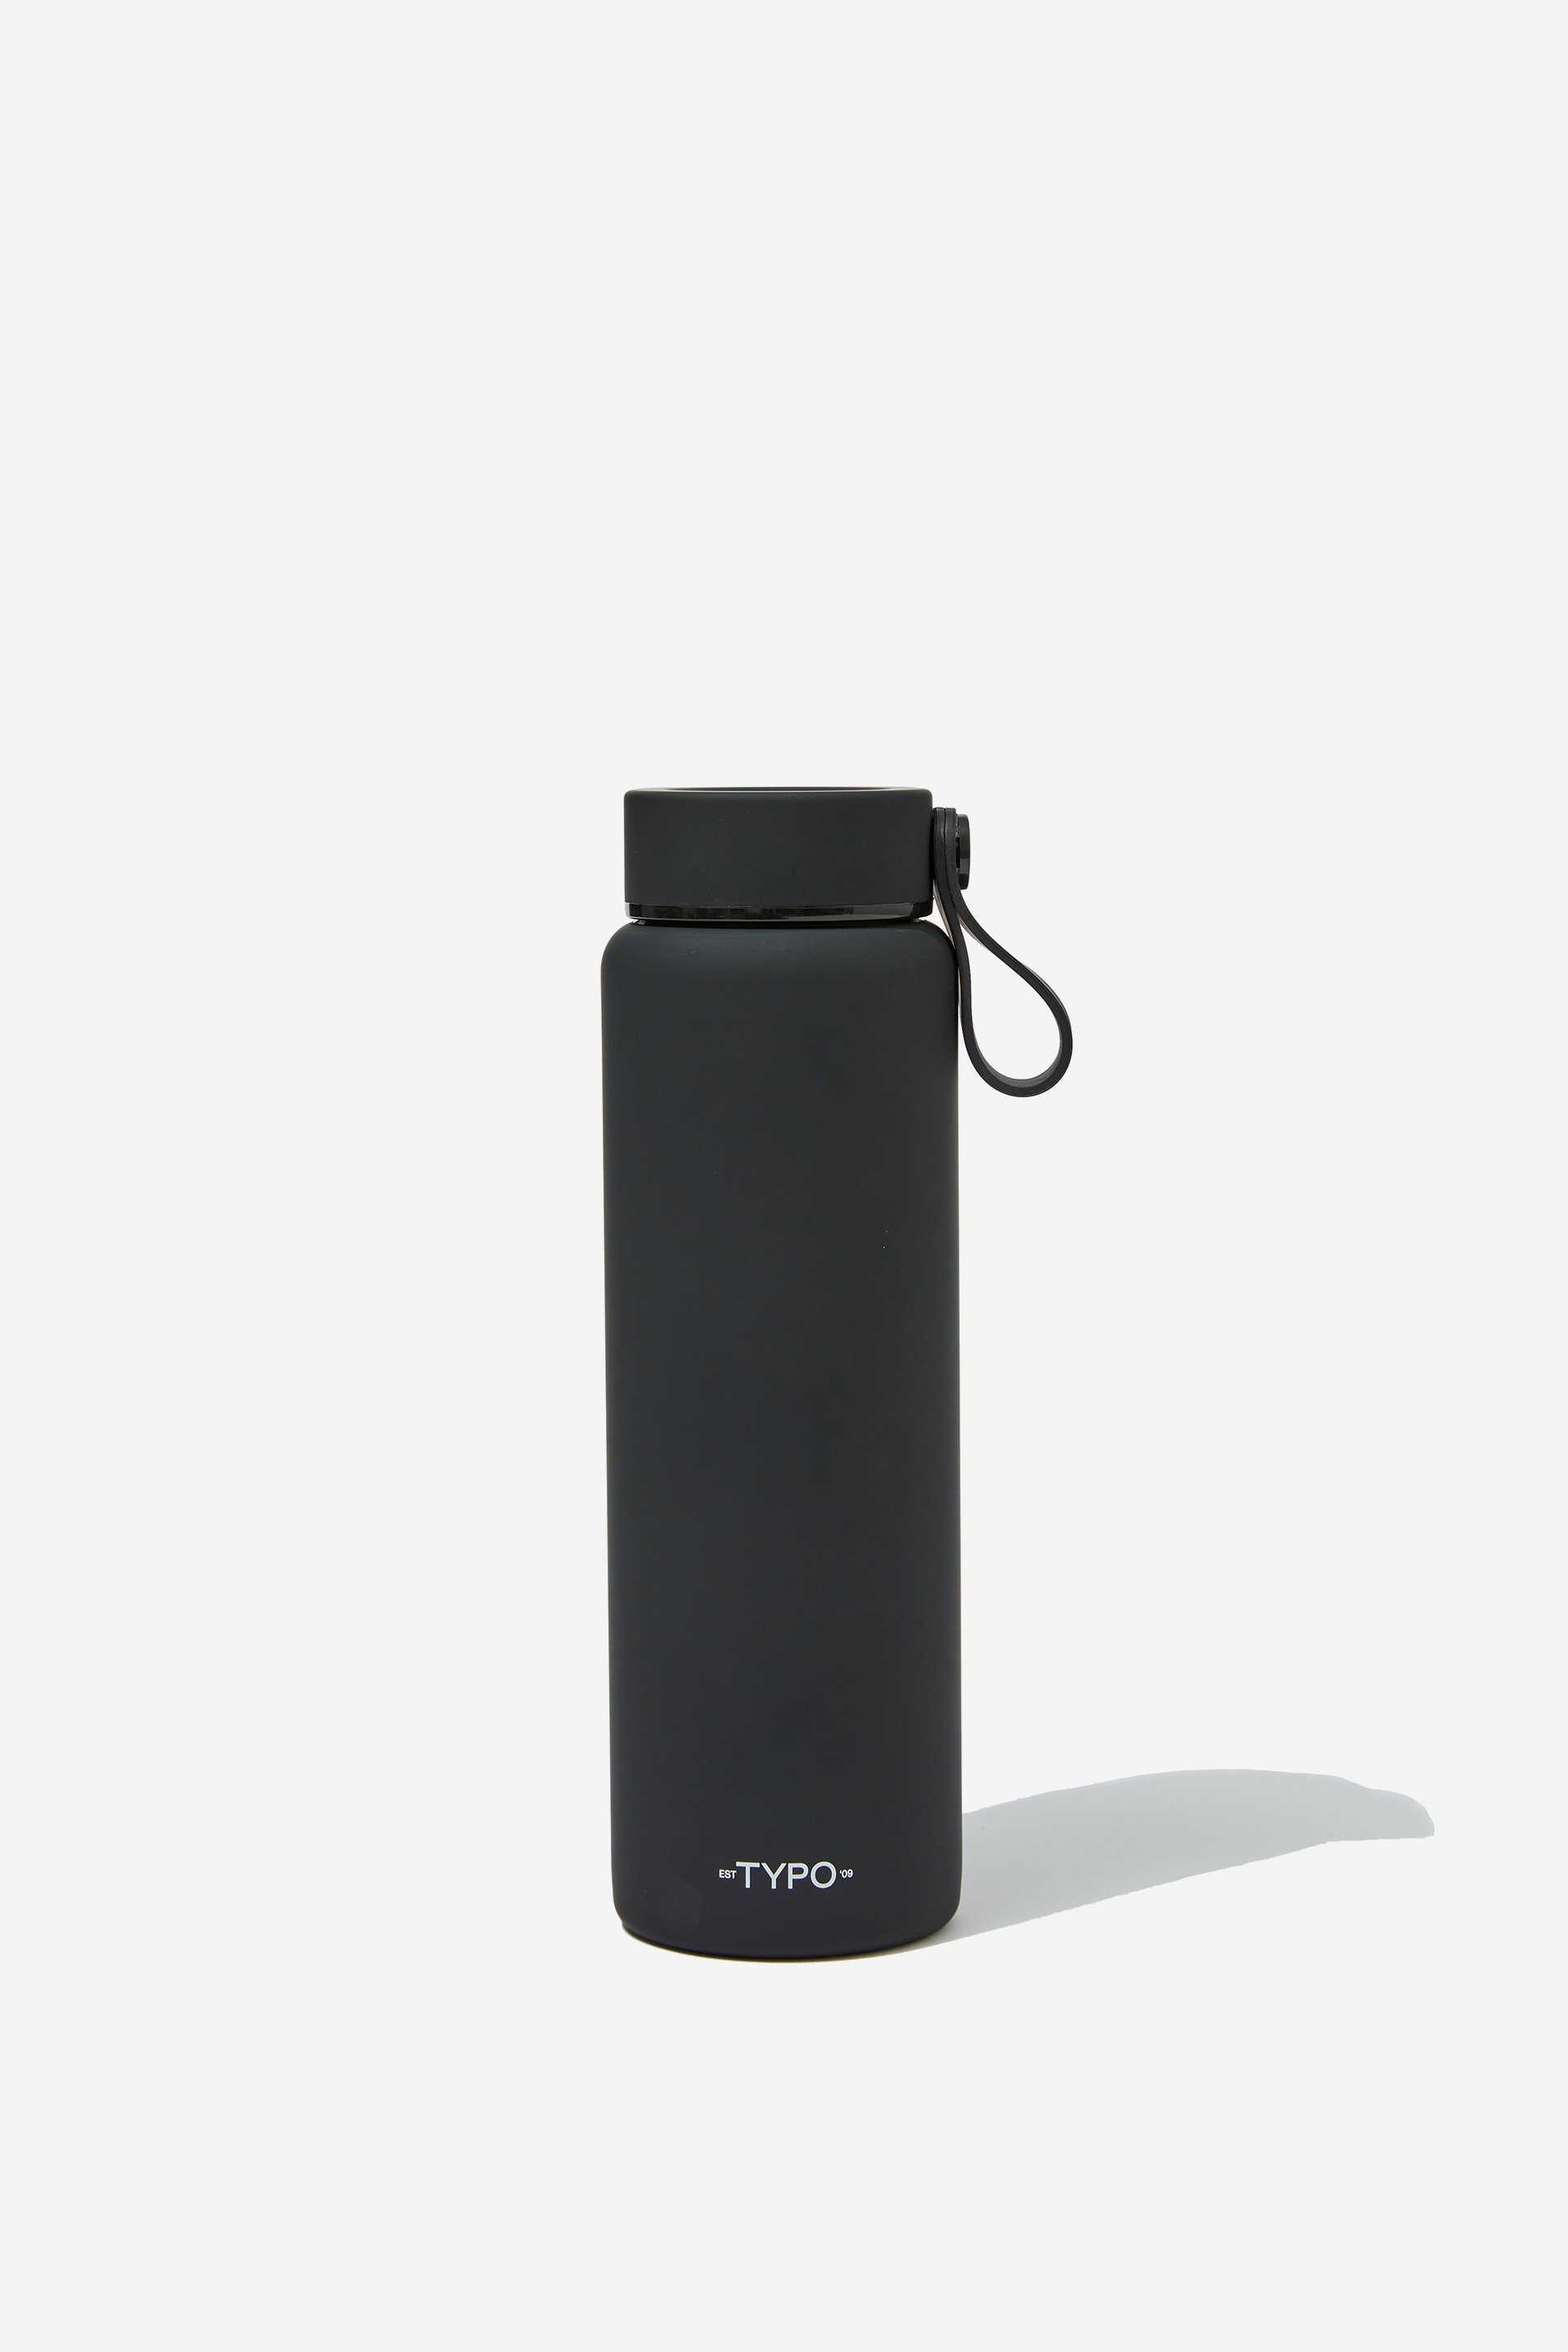 Typo - On The Move 500Ml Drink Bottle 2.0 - Black